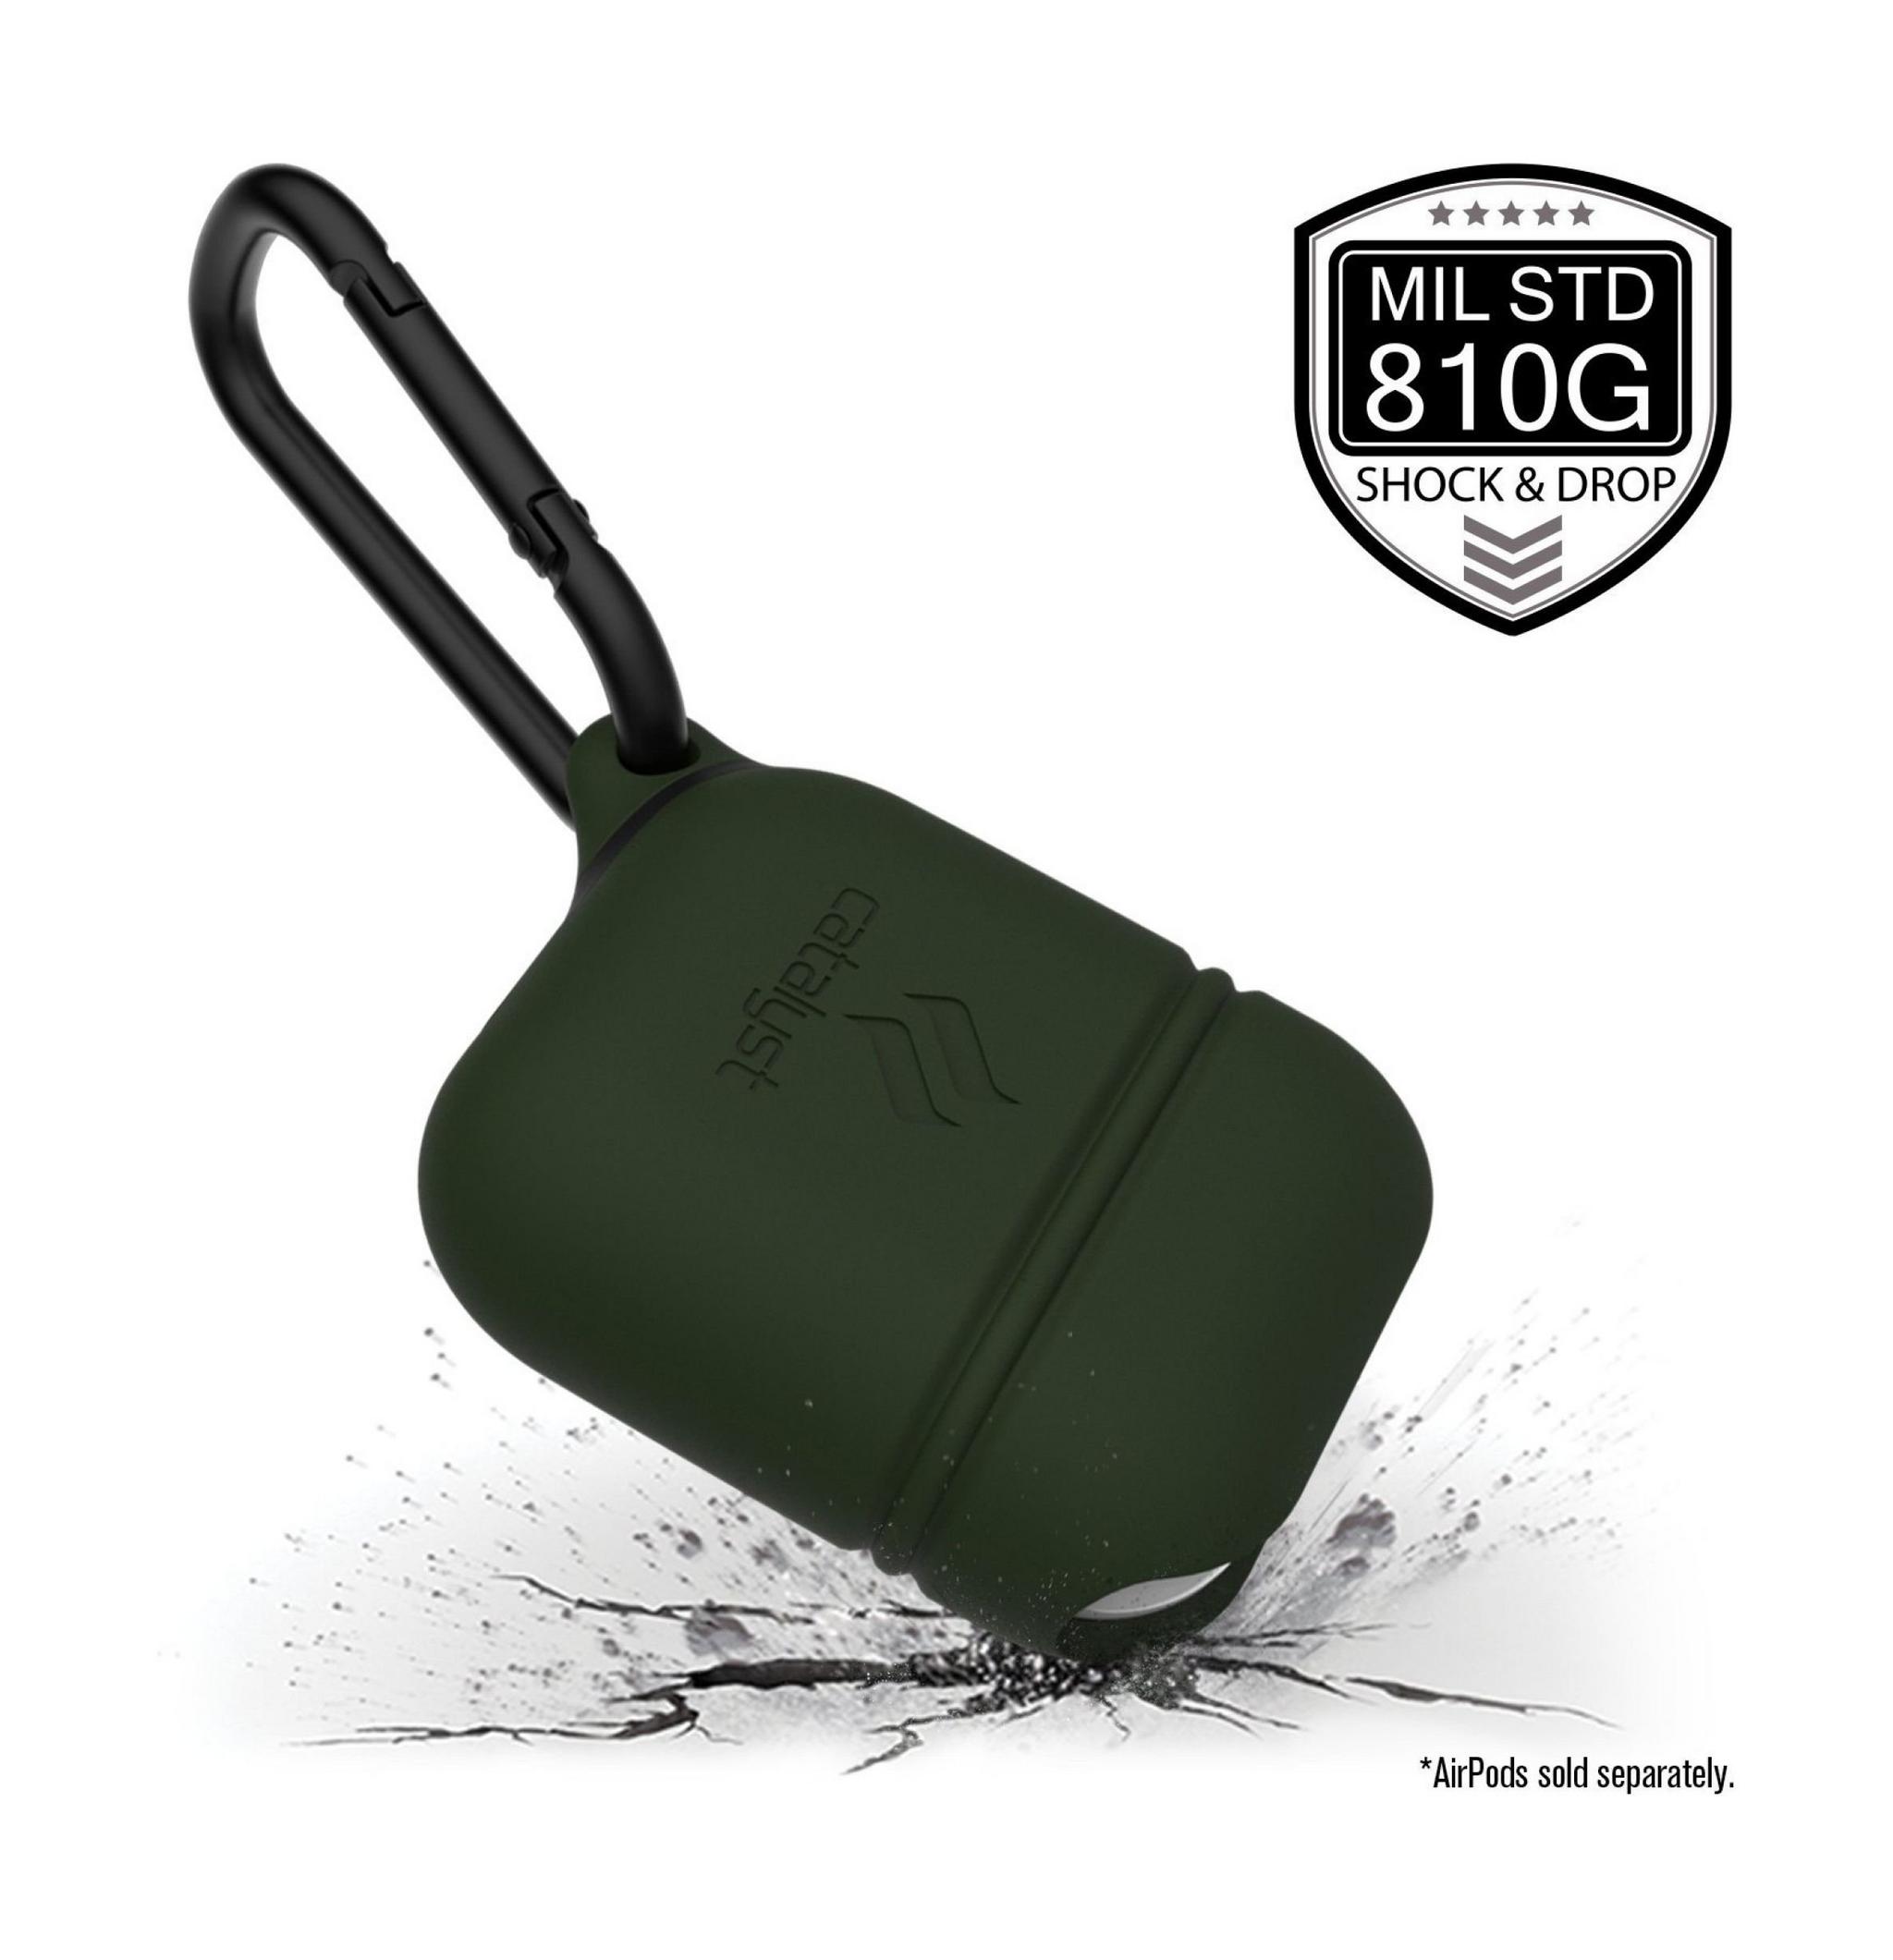 Catalyst Waterproof Case for Apple AirPod - Army Green